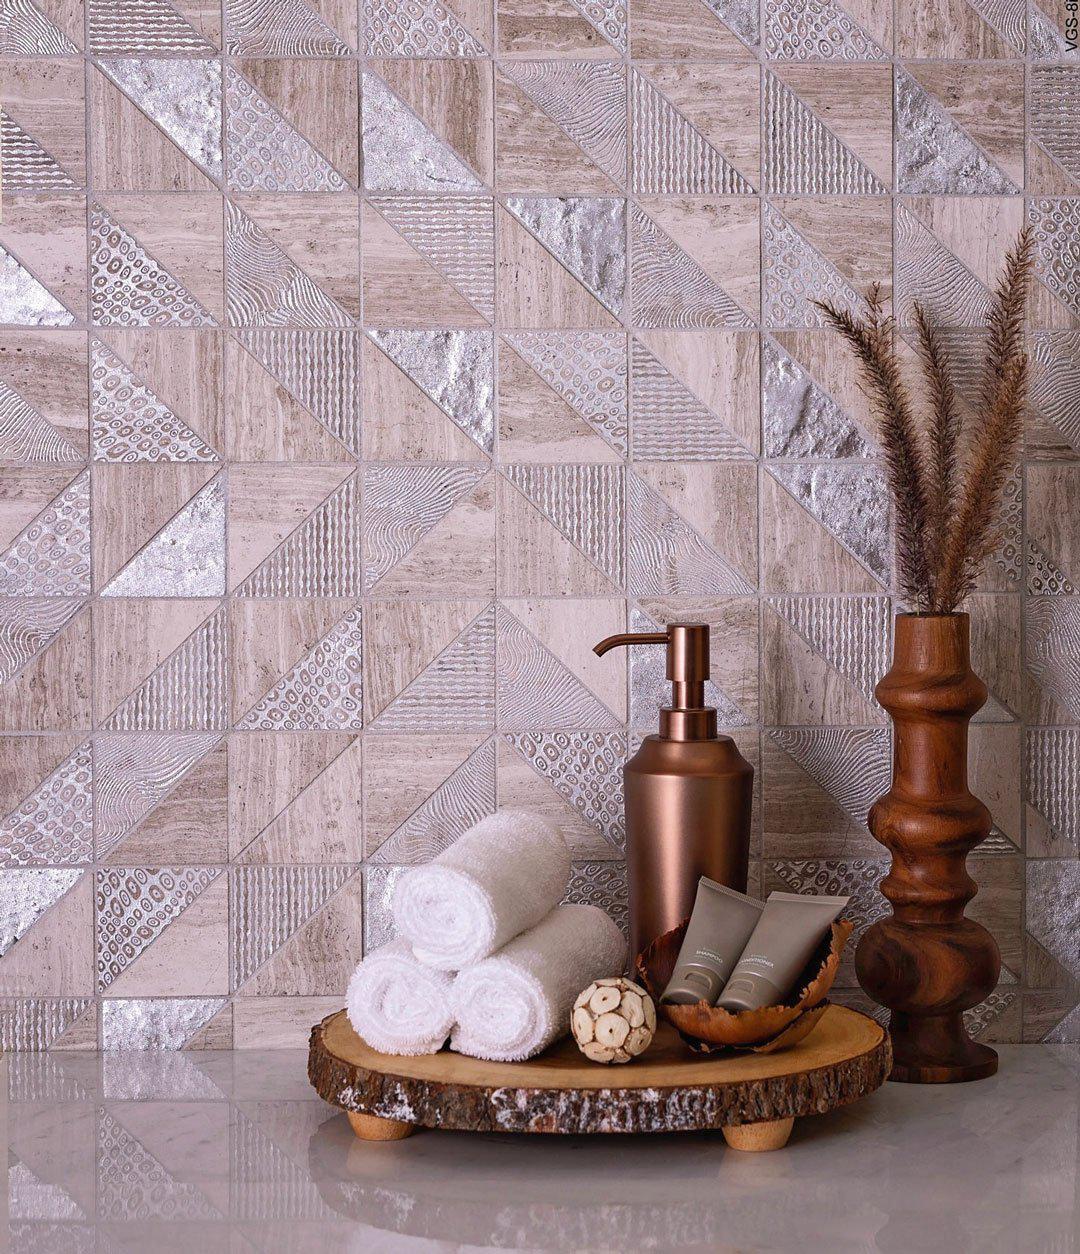 Silver Grey Triangles Wooden Beige Marble Mosaic Tile For a Metallic and Wood Bathroom